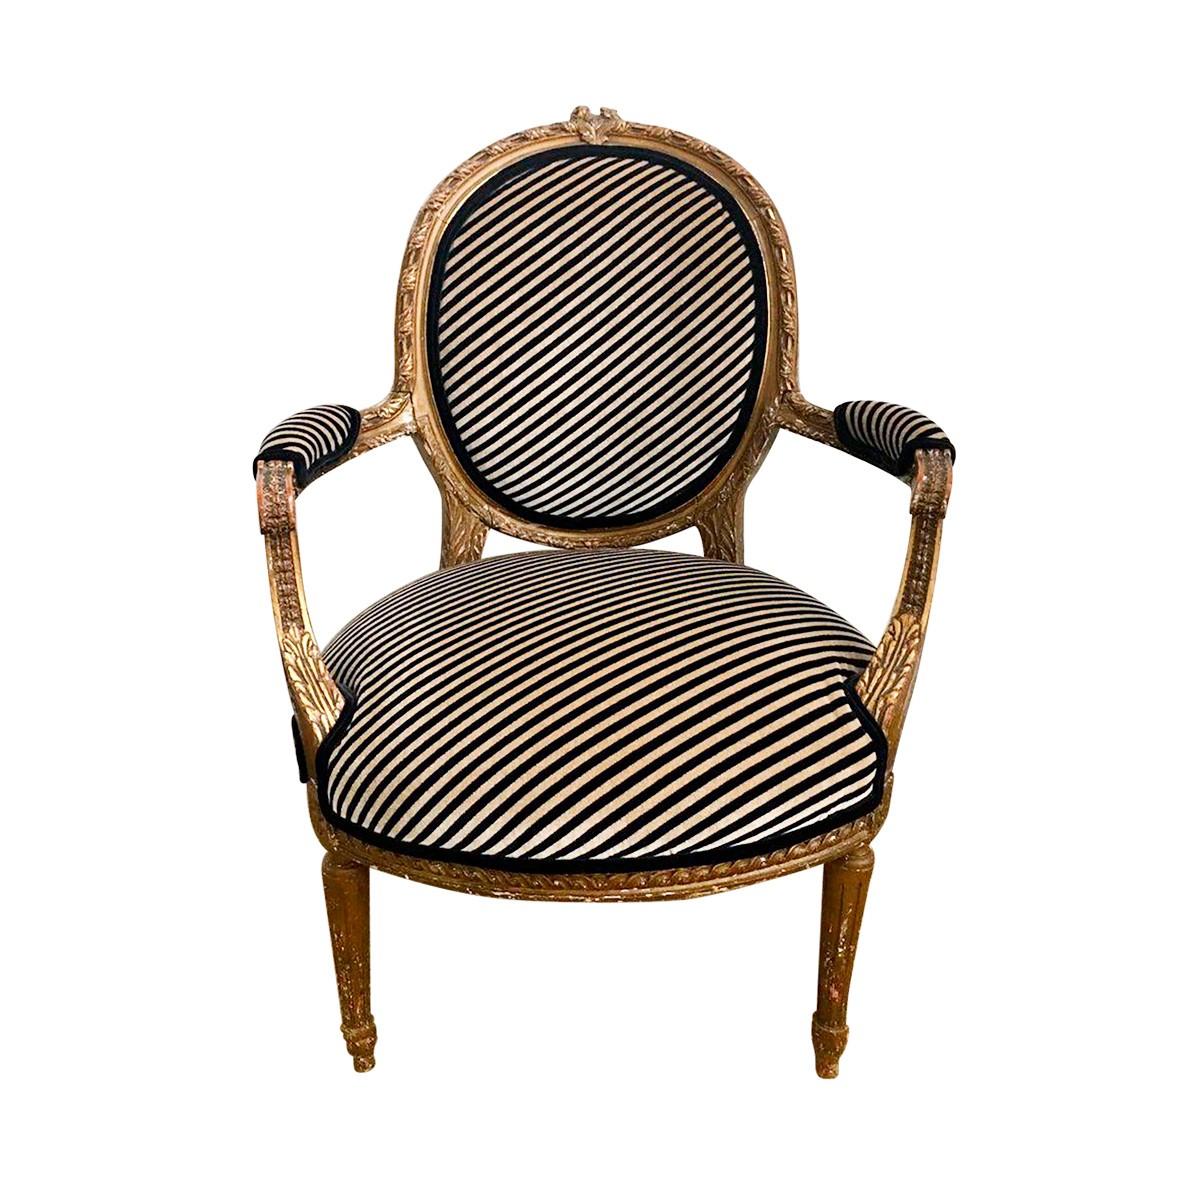 Early 20th century Louis XVI style carved giltwood armchair with round tapered legs. This oval back Fauteuil features beautifully carved acanthus leaf appointments and is newly reupholstered in a Lee Jofa beige/gold and black Oblique modern diagonal